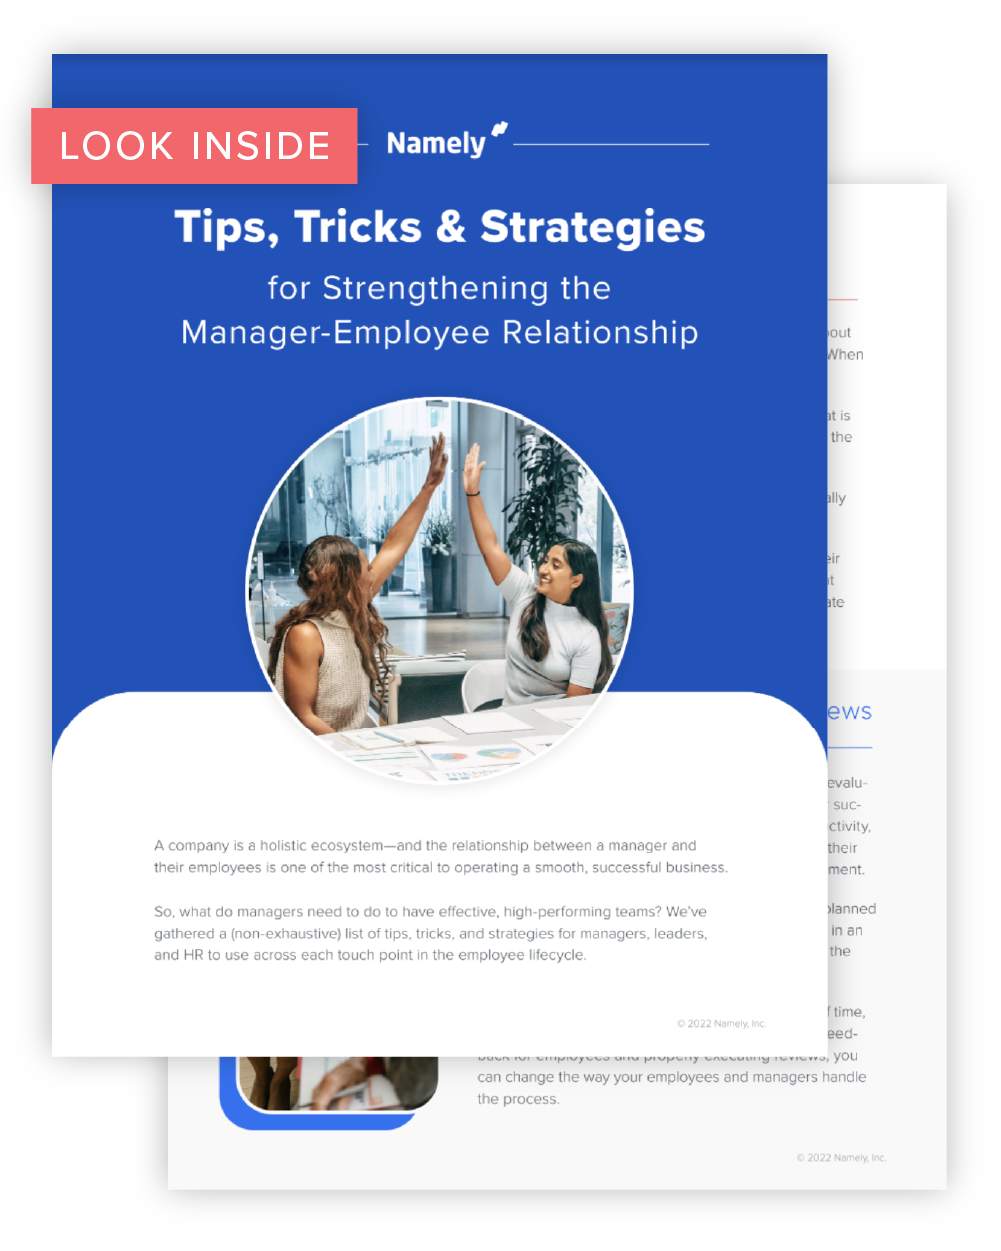 Tips, Tricks & Strategies for Strengthening the Manager-Employee Relationship